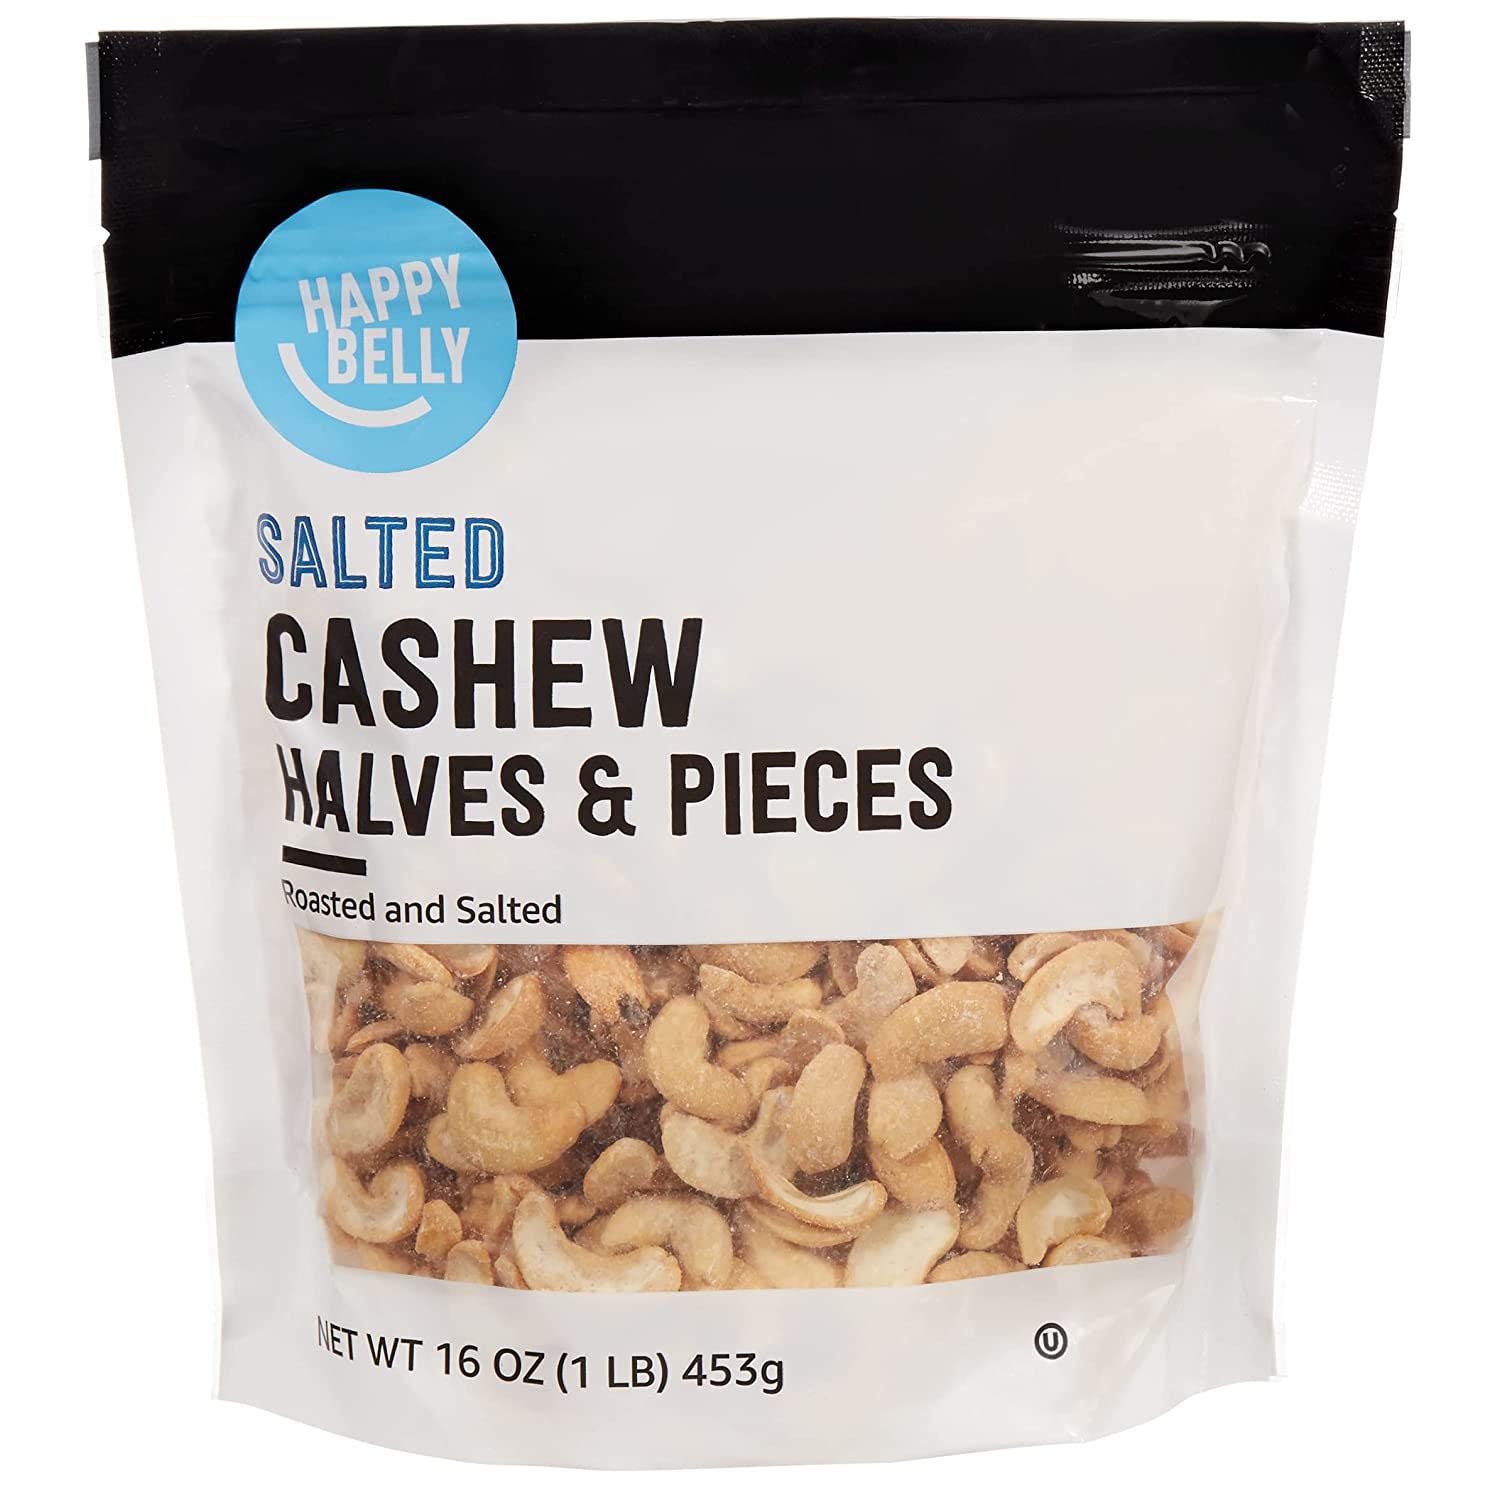 Happy Belly Roasted and Salted Cashew Halves and Pieces for $5.38 Shipped